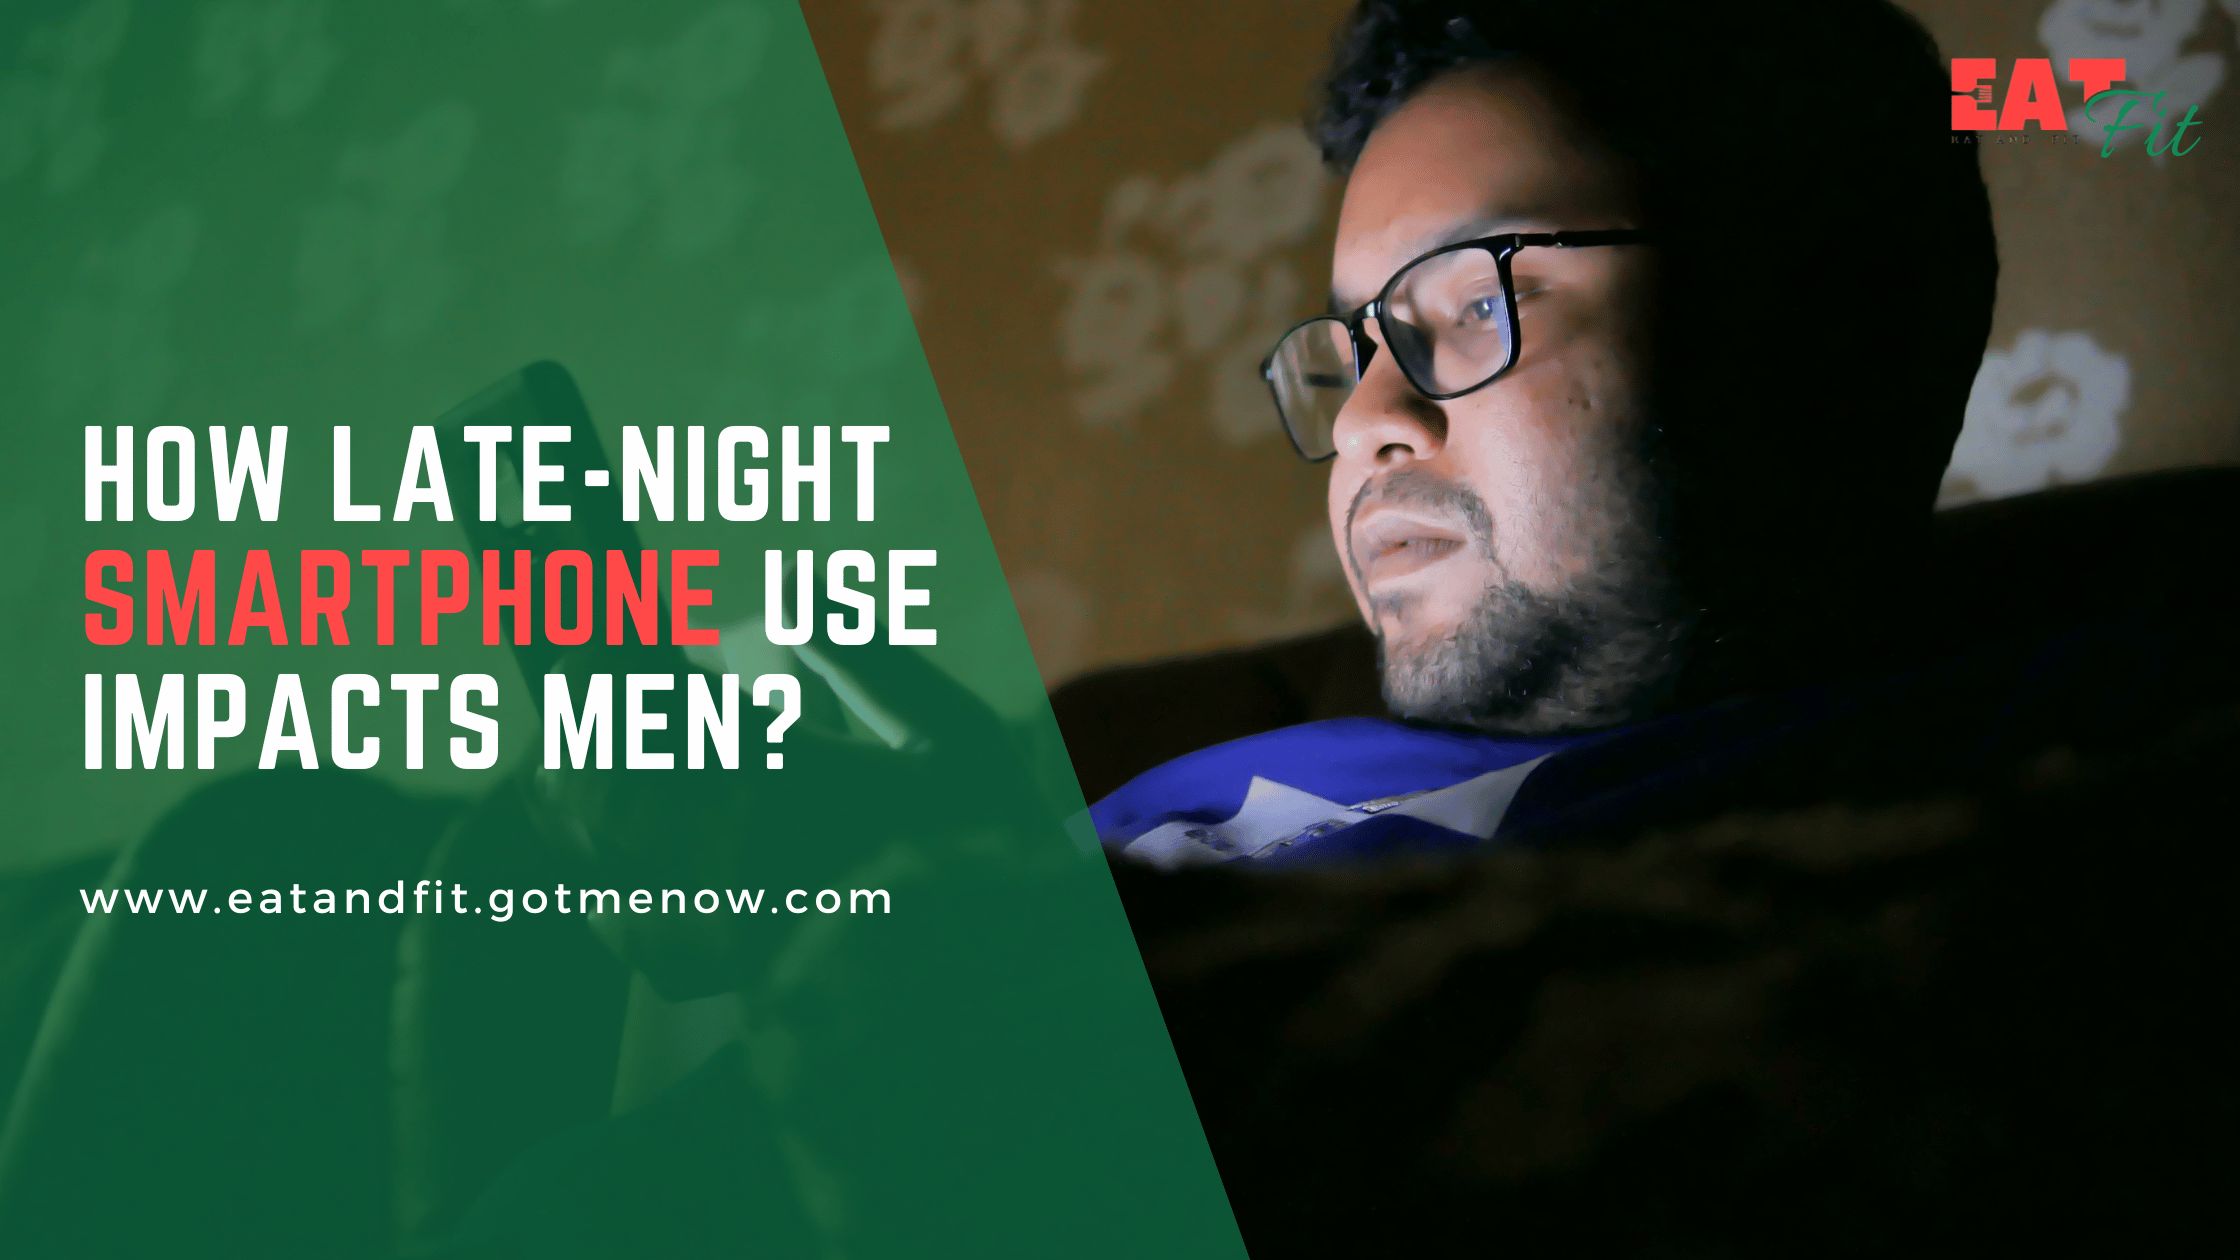 Studies show that late-night use of smartphone can lead to infertility in men.